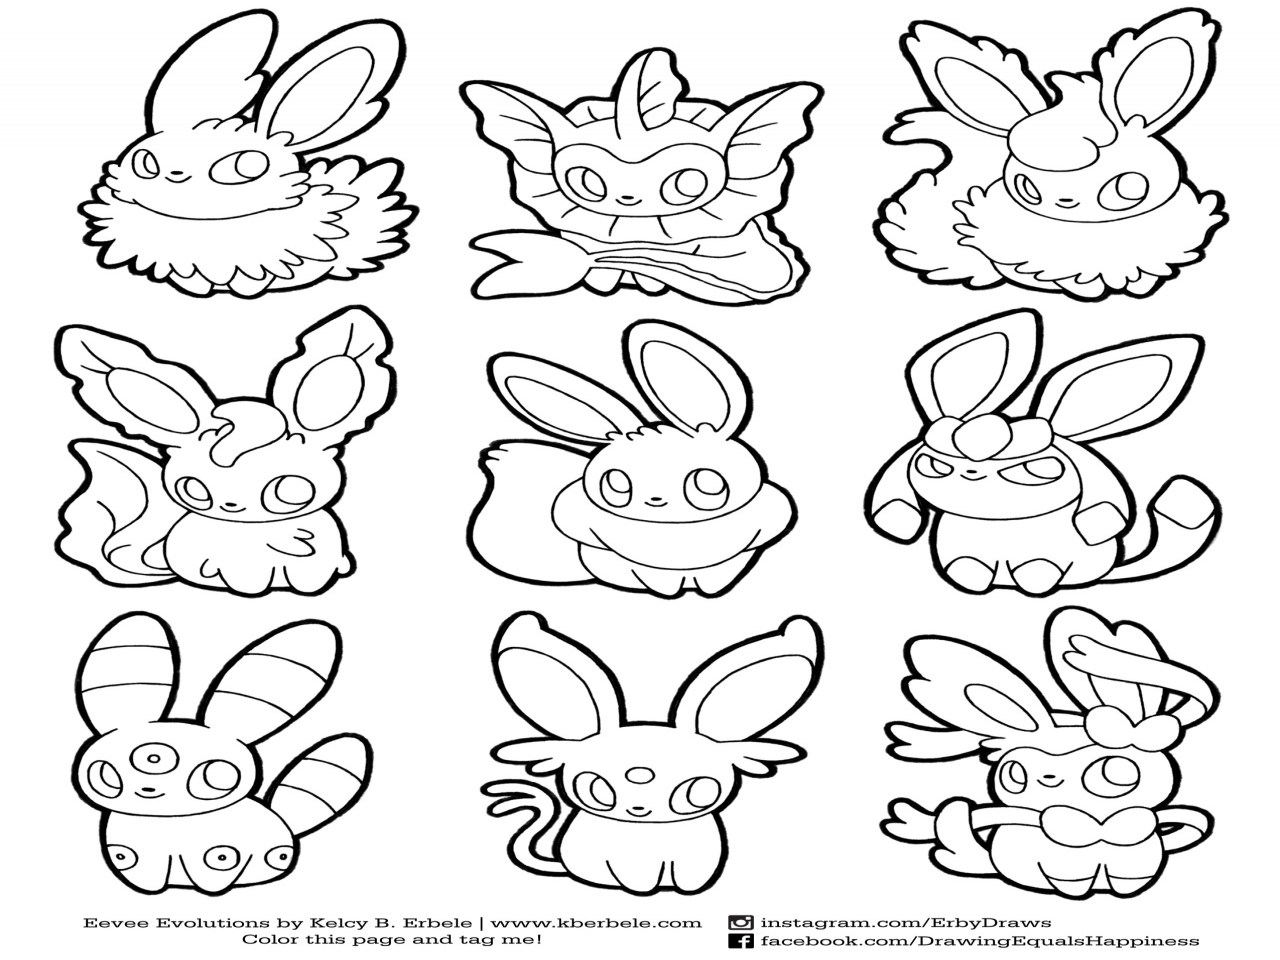 Eeveelutions Coloring Pages At Getdrawings | Free Download